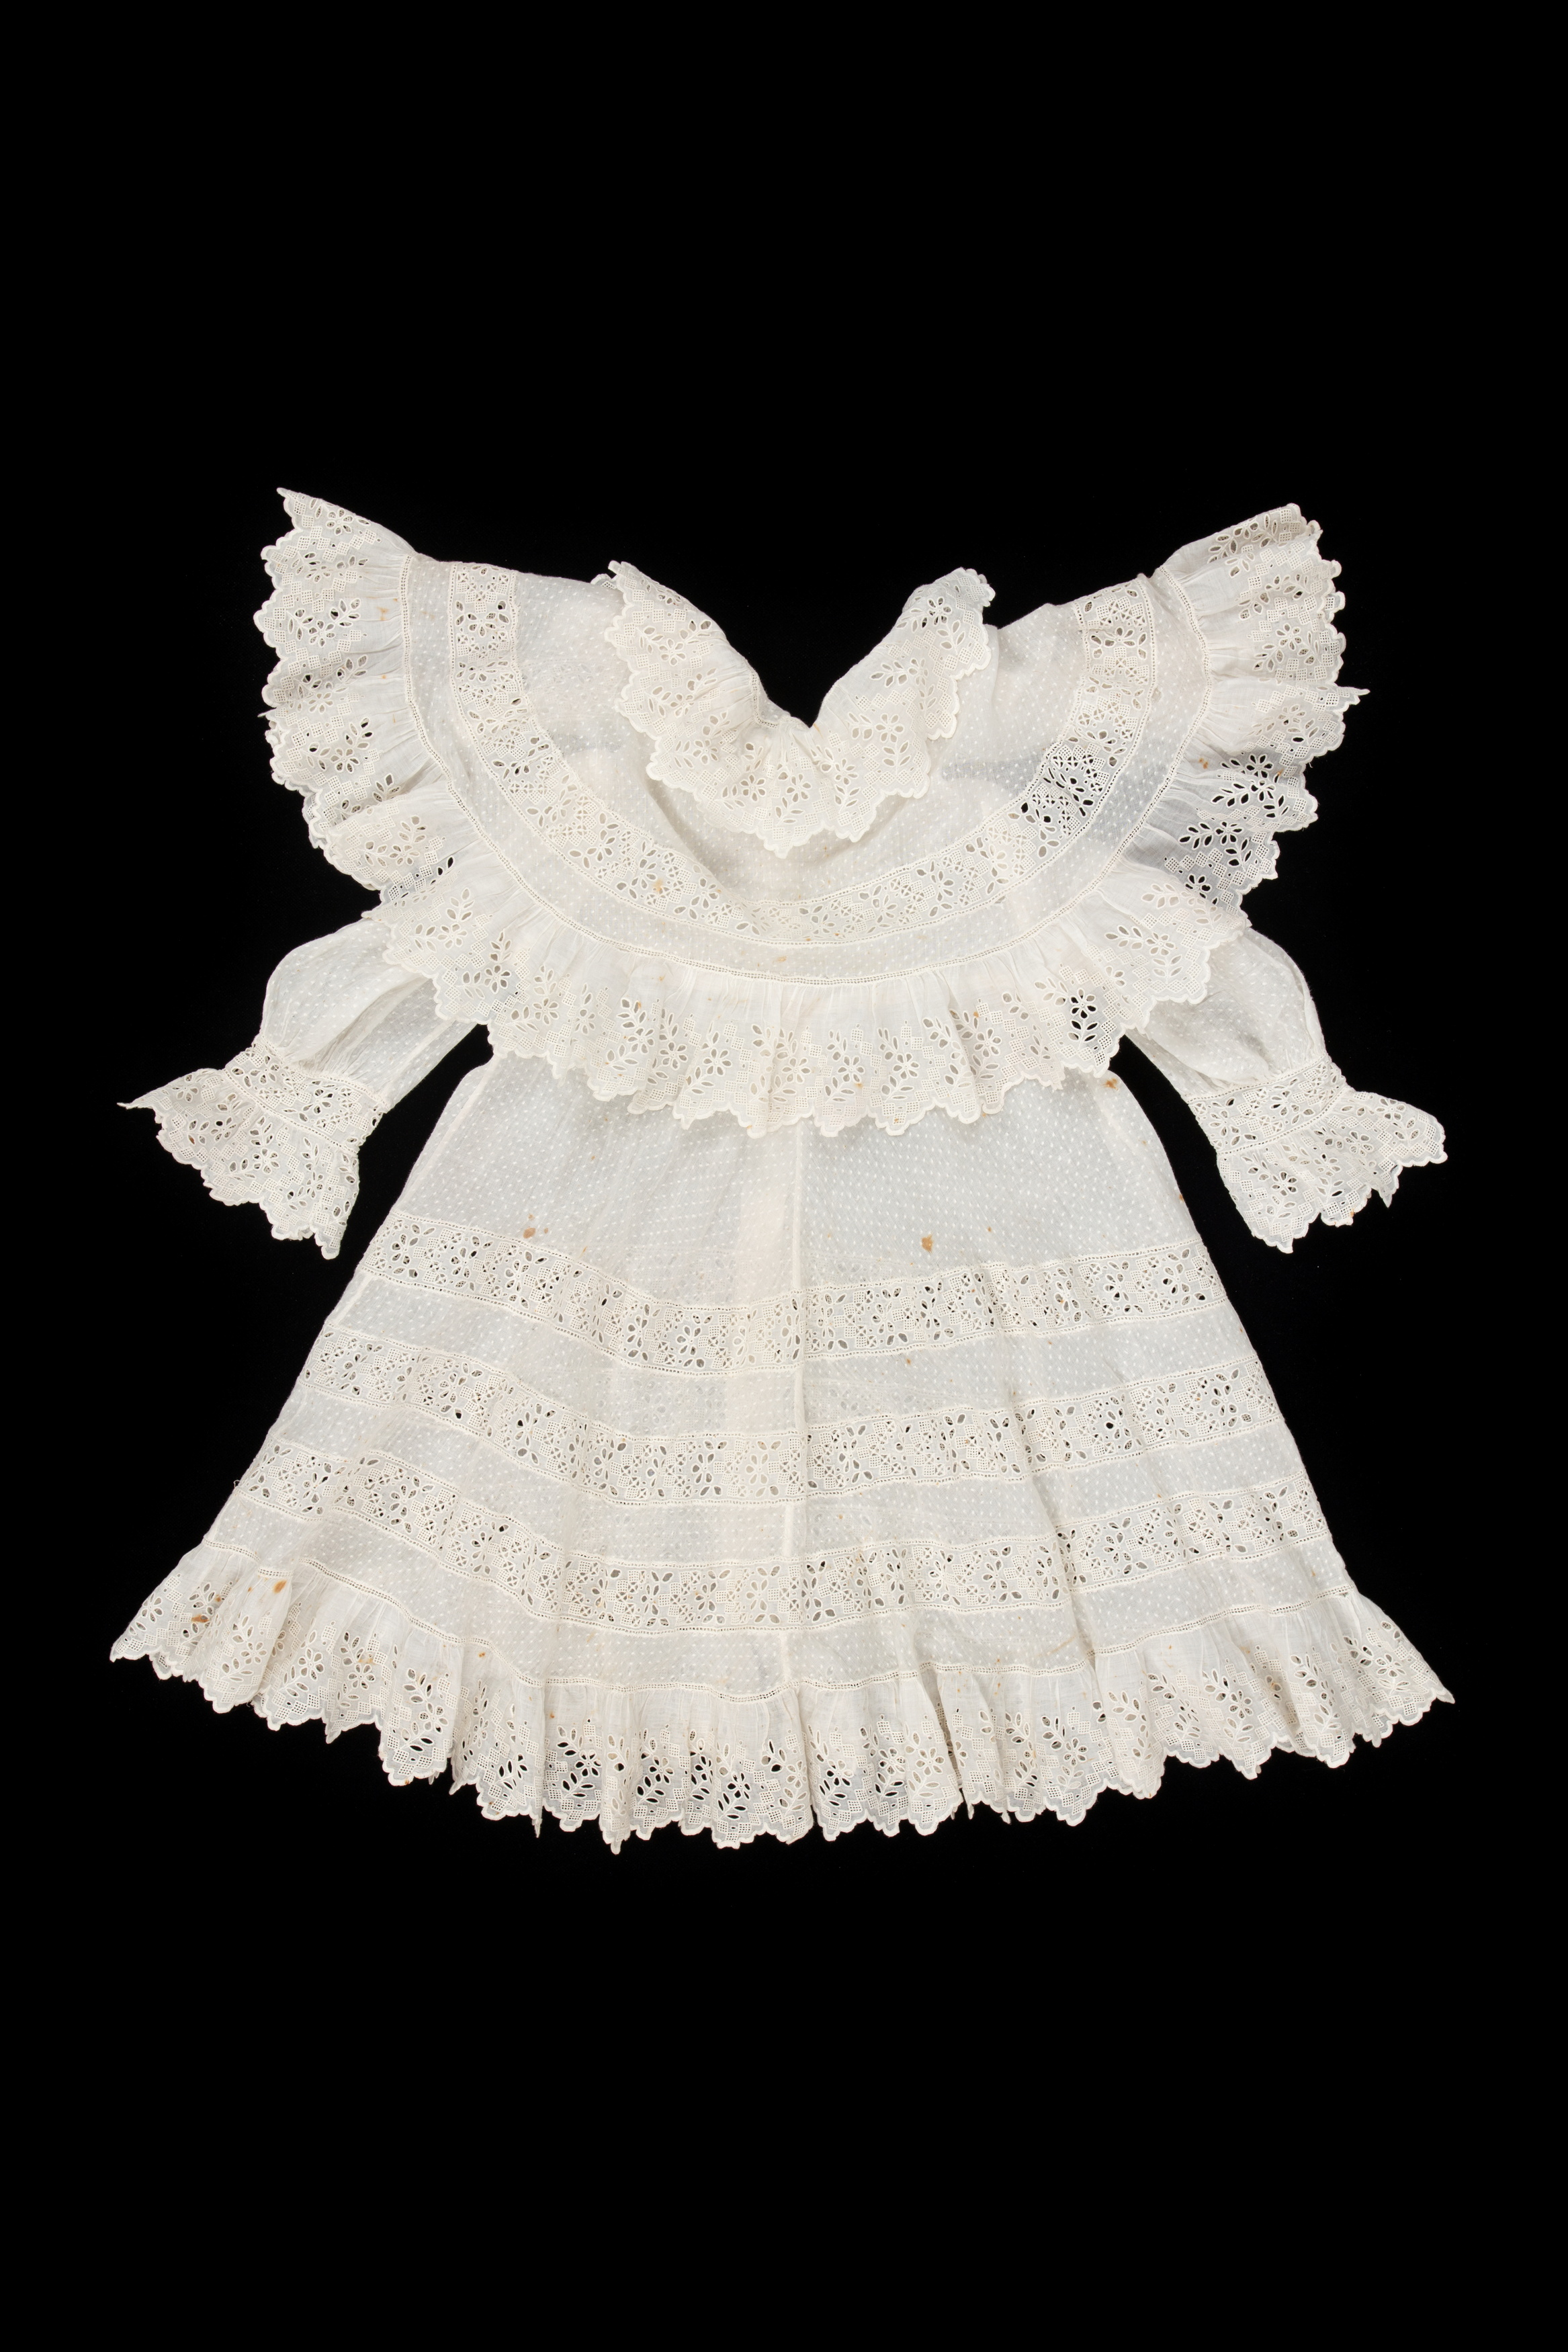 Childs dress with double cape